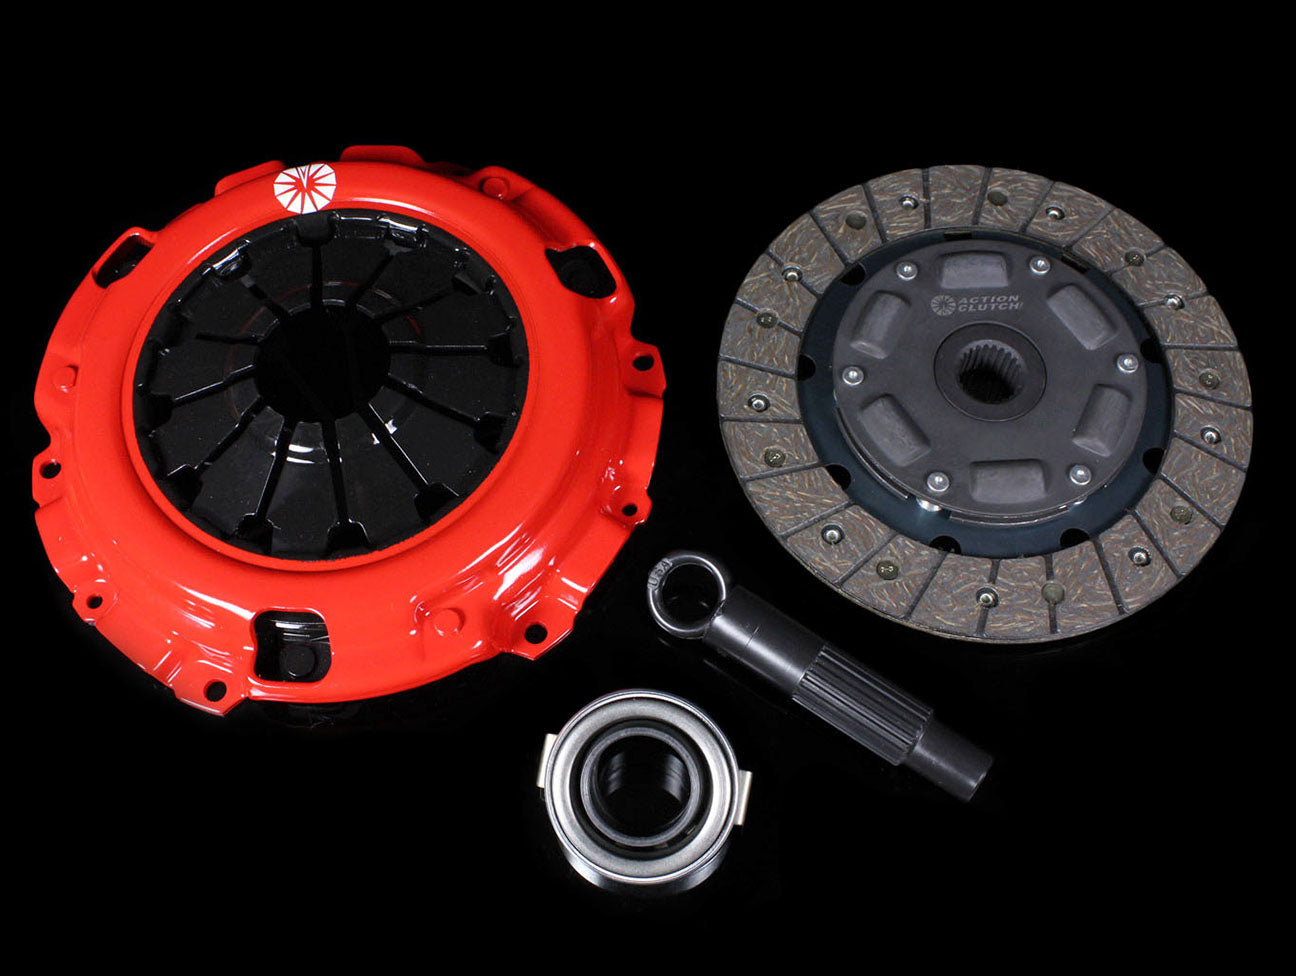 Action Clutch Stage 1 1OS Clutch Kit - Honda Civic EX / SI 2016-2020 1.5L TURBO